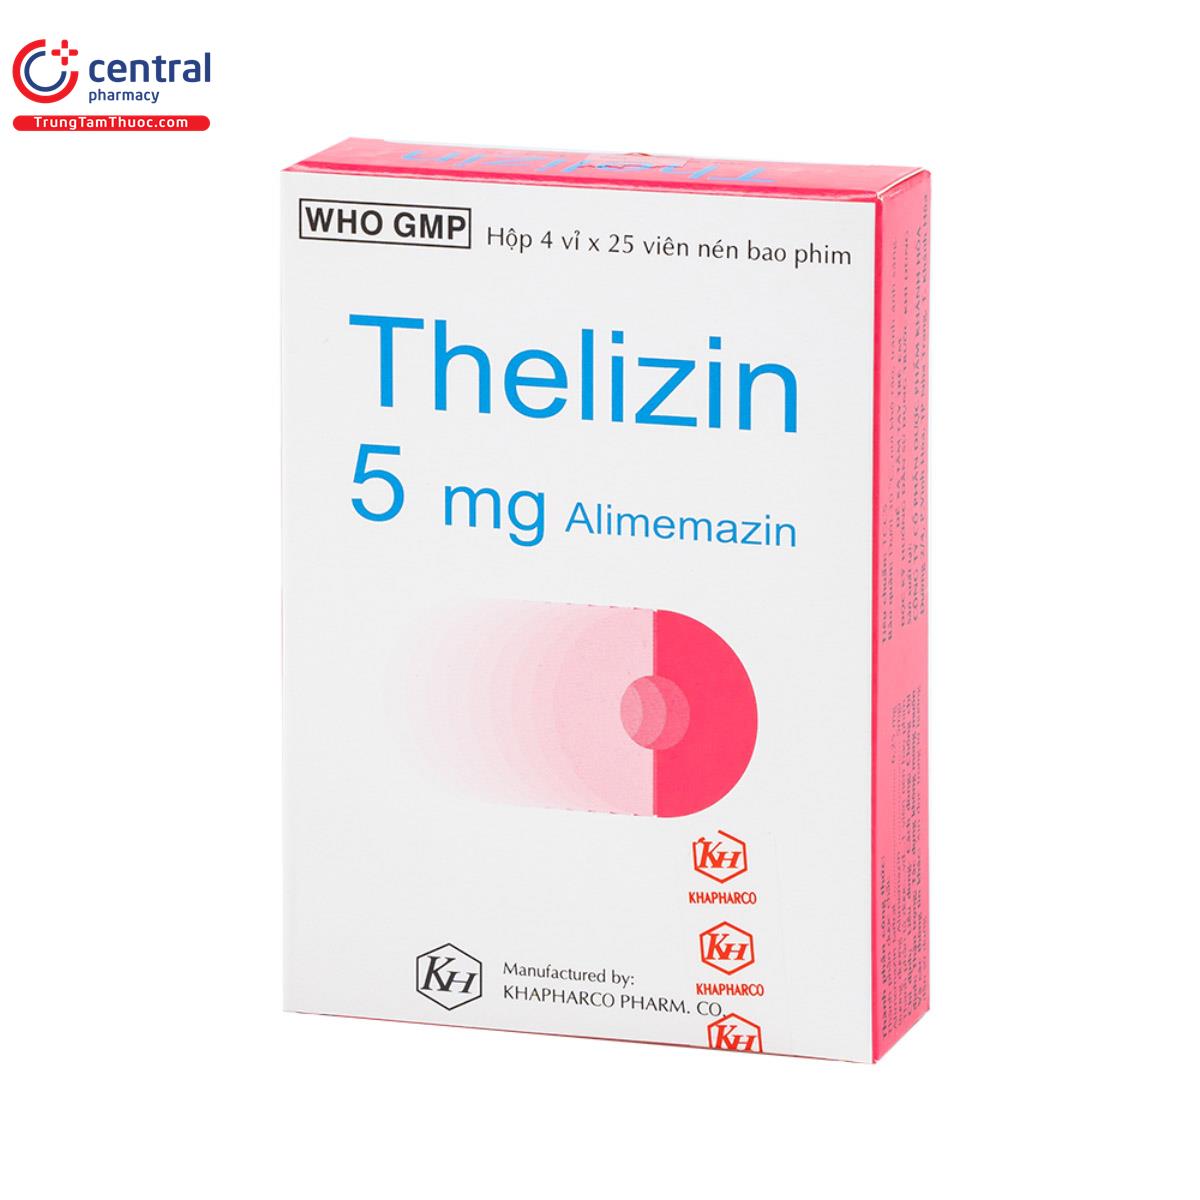 thelizin 5mg 0 R7430